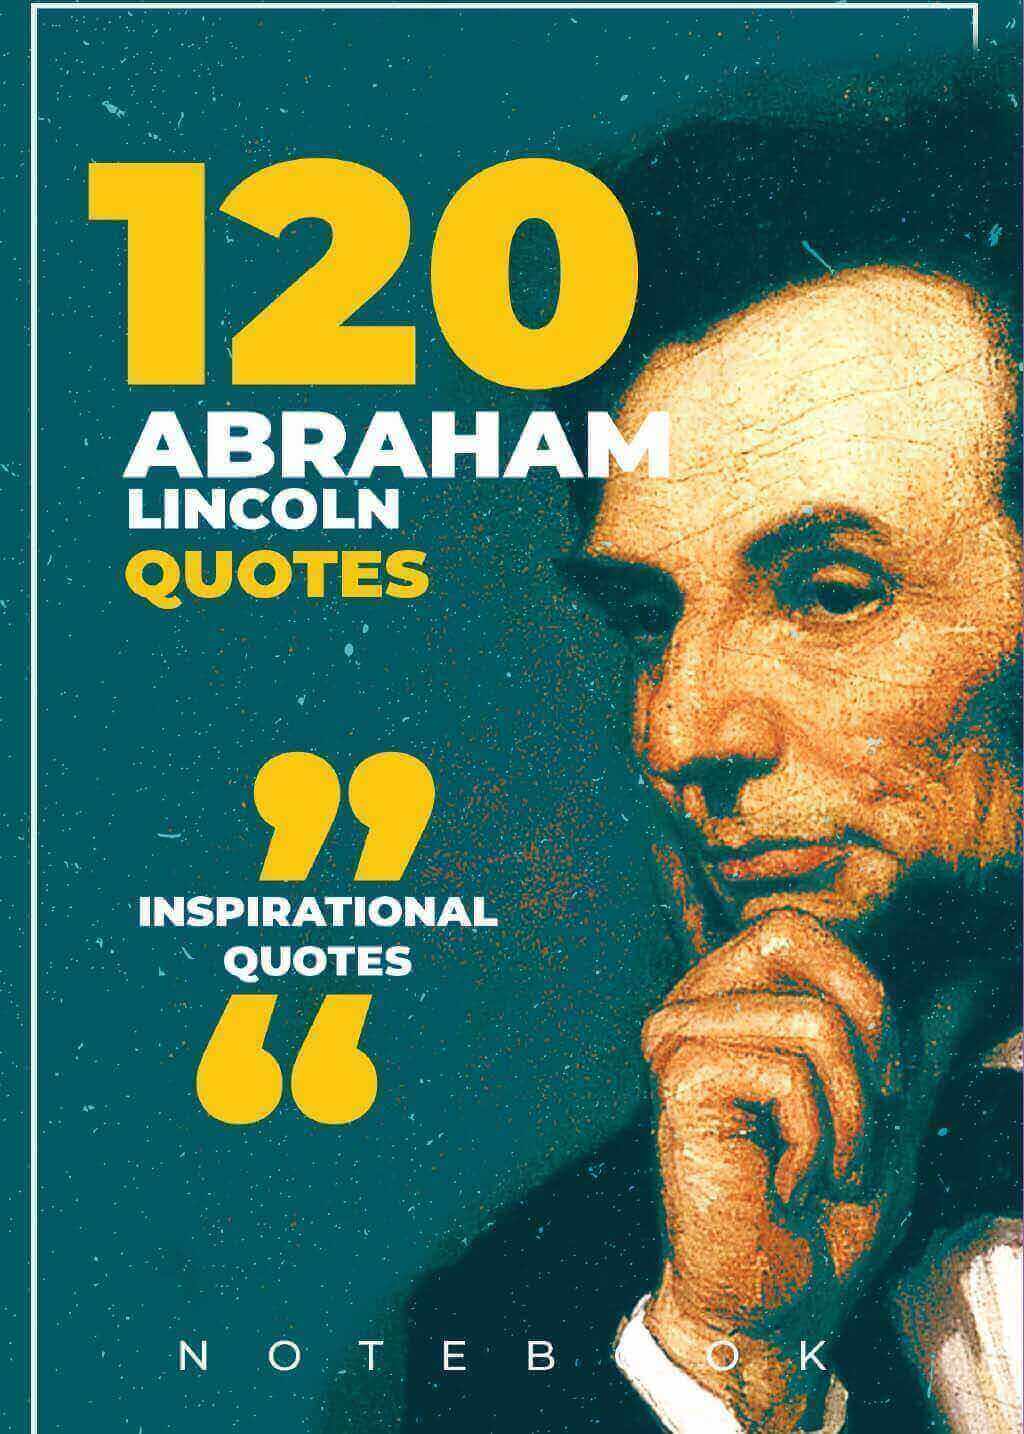 Journal Abraham Lincoln quotes notebook